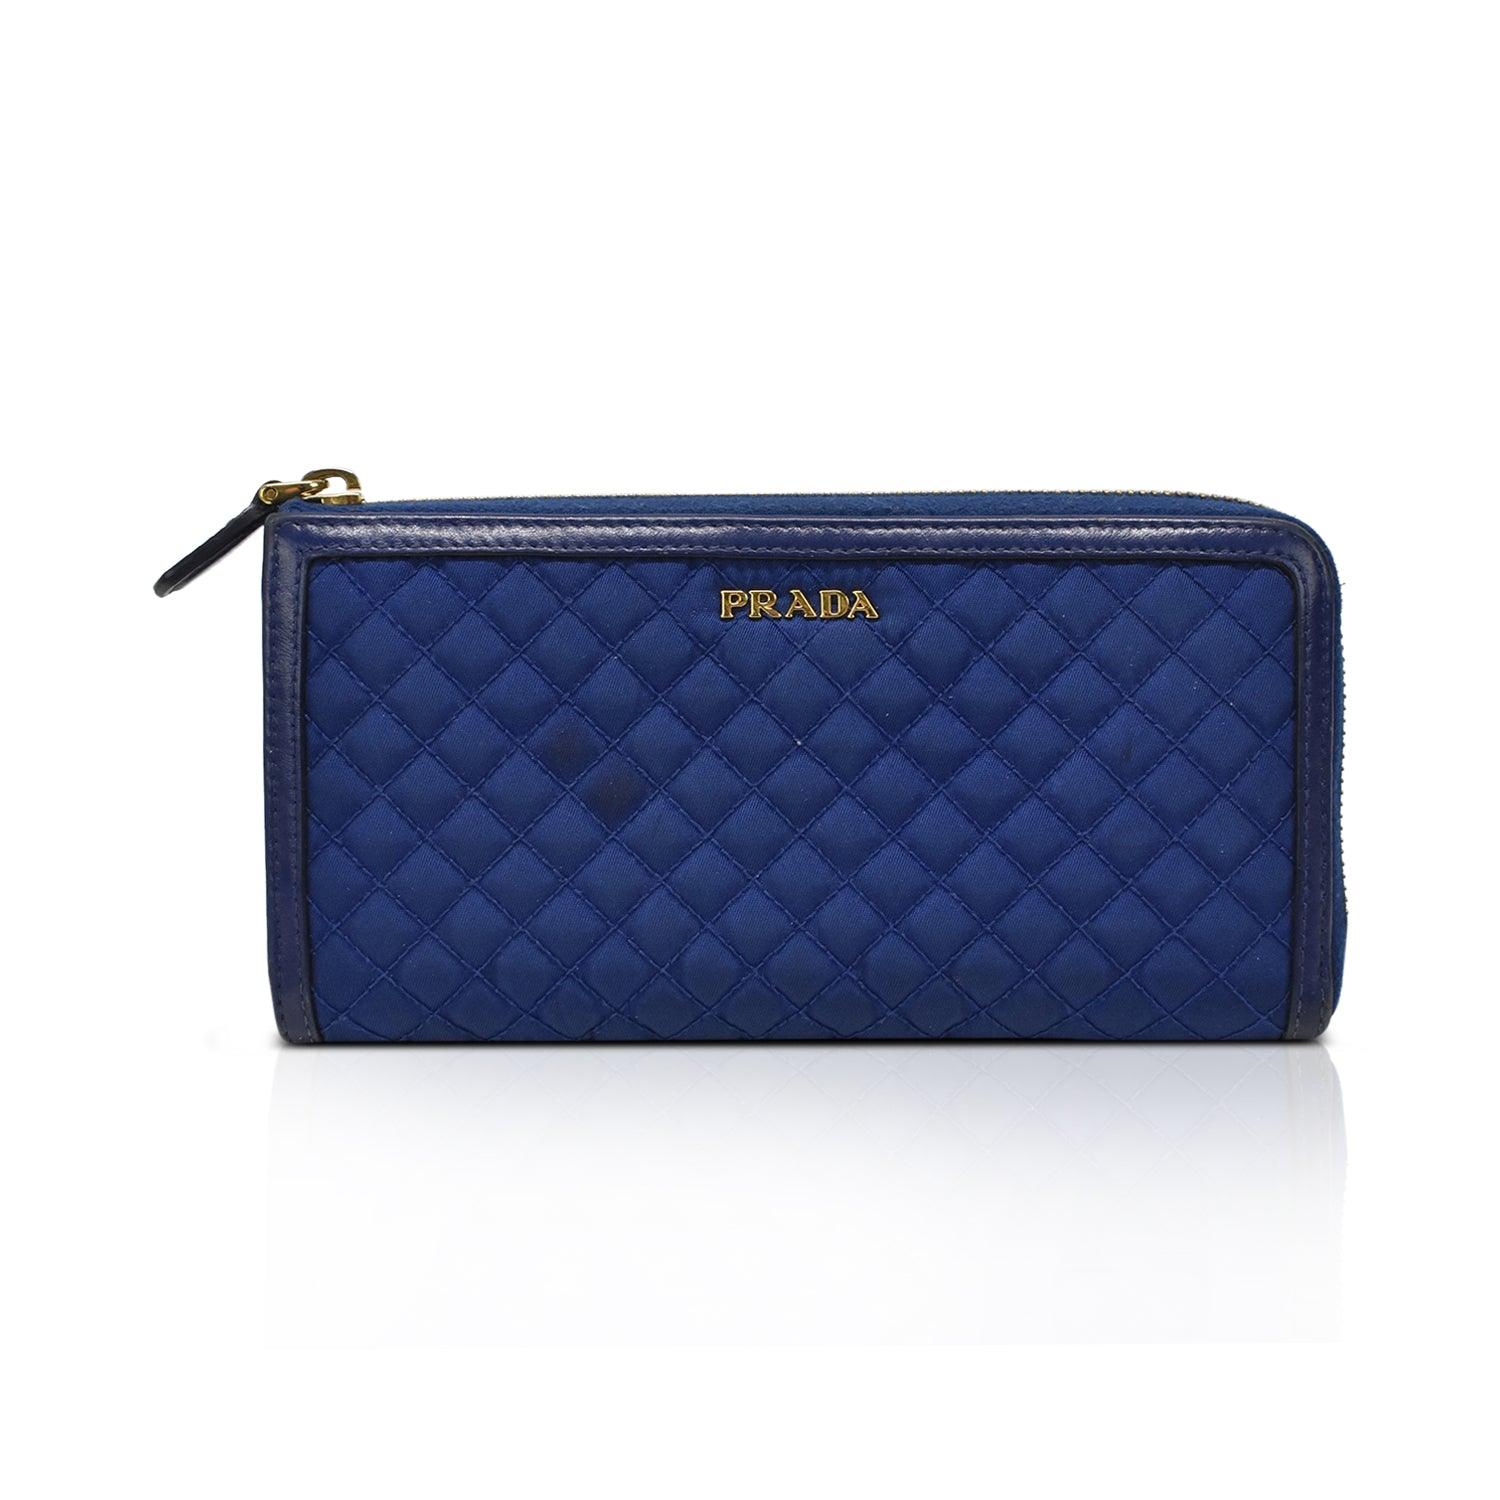 Prada Long Wallet - Fashionably Yours